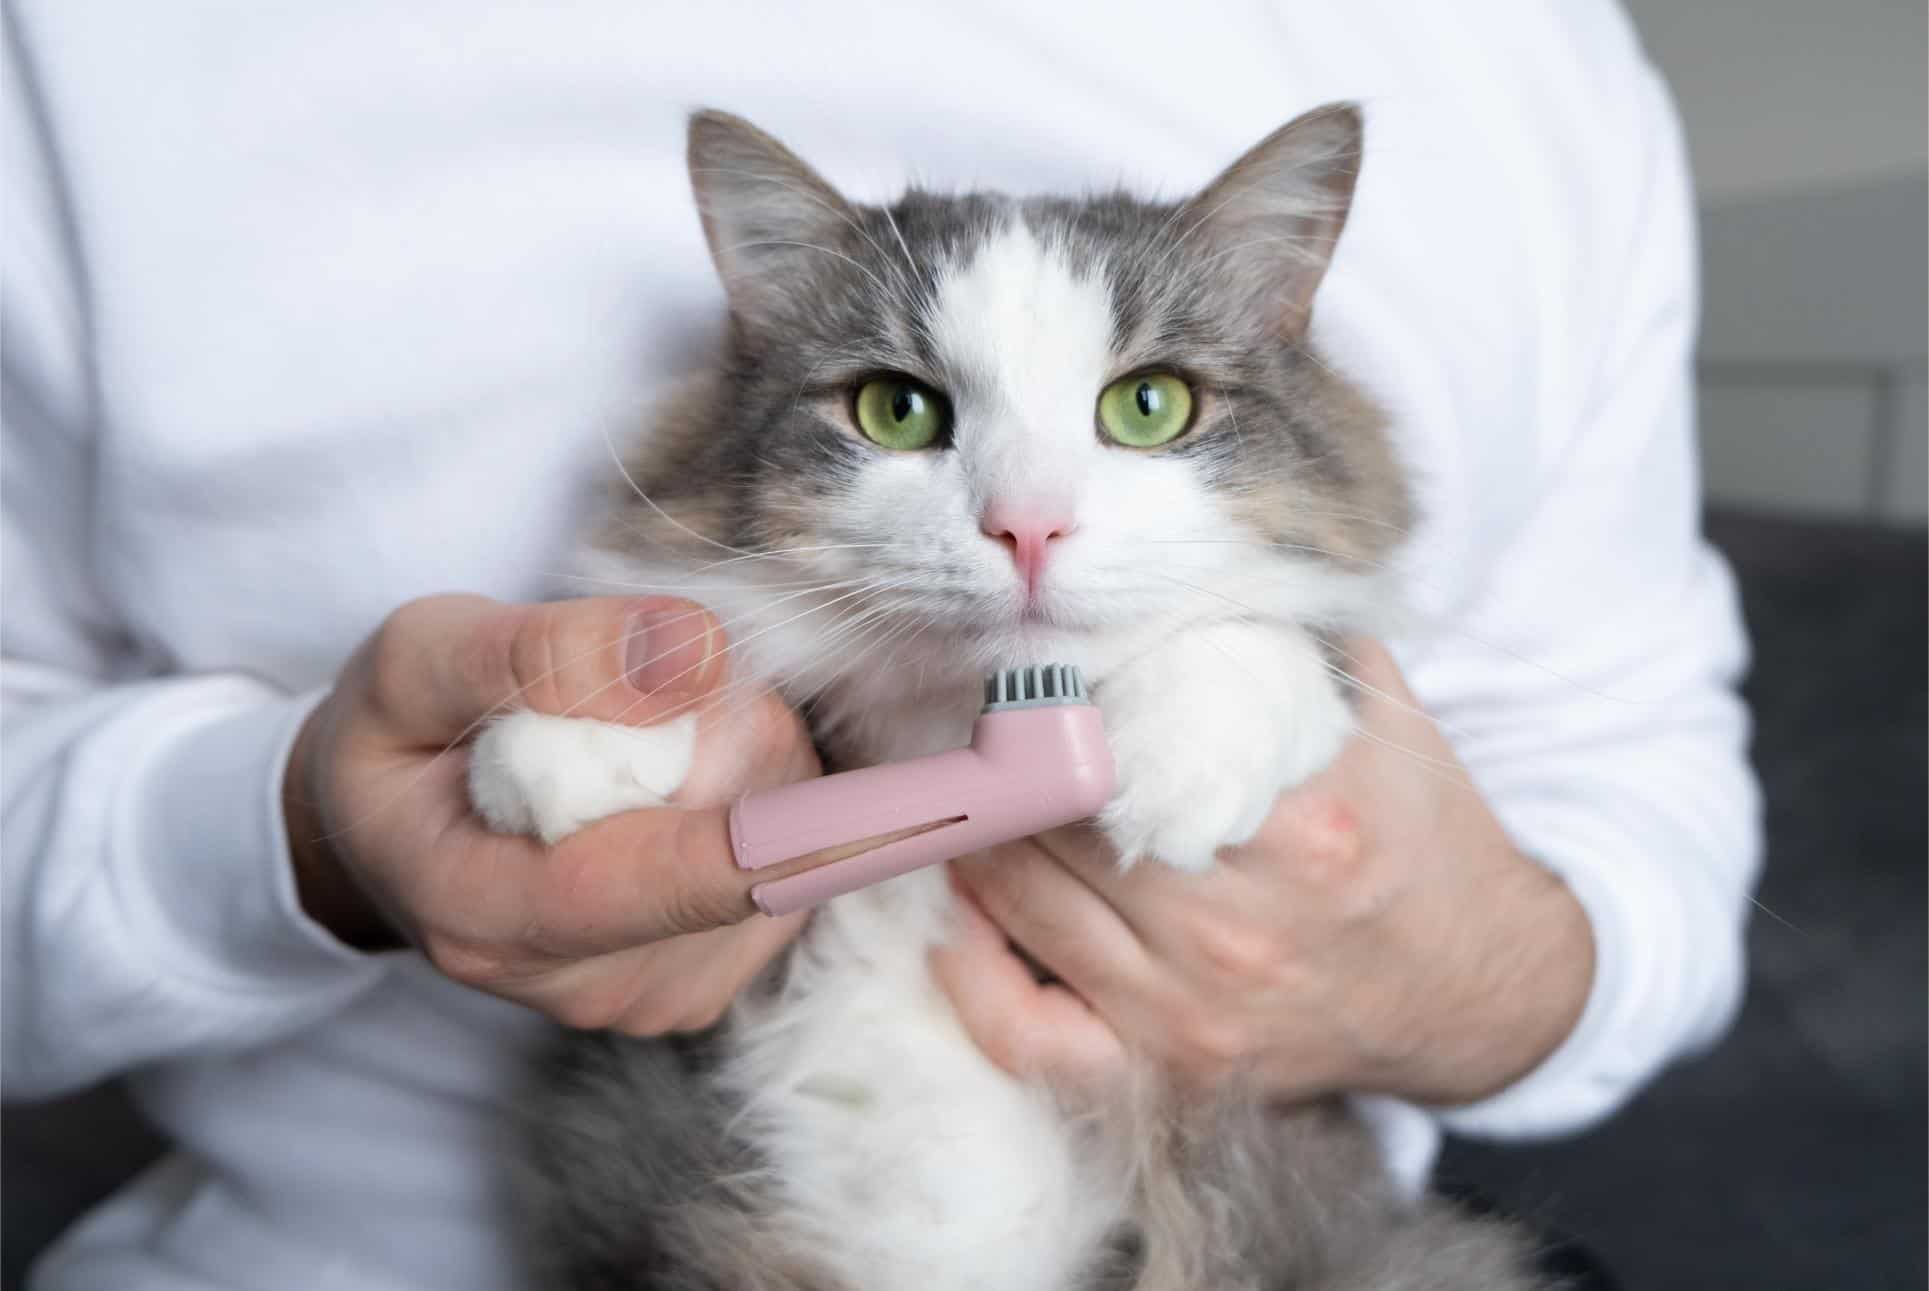  man brushes teeth of a cat.